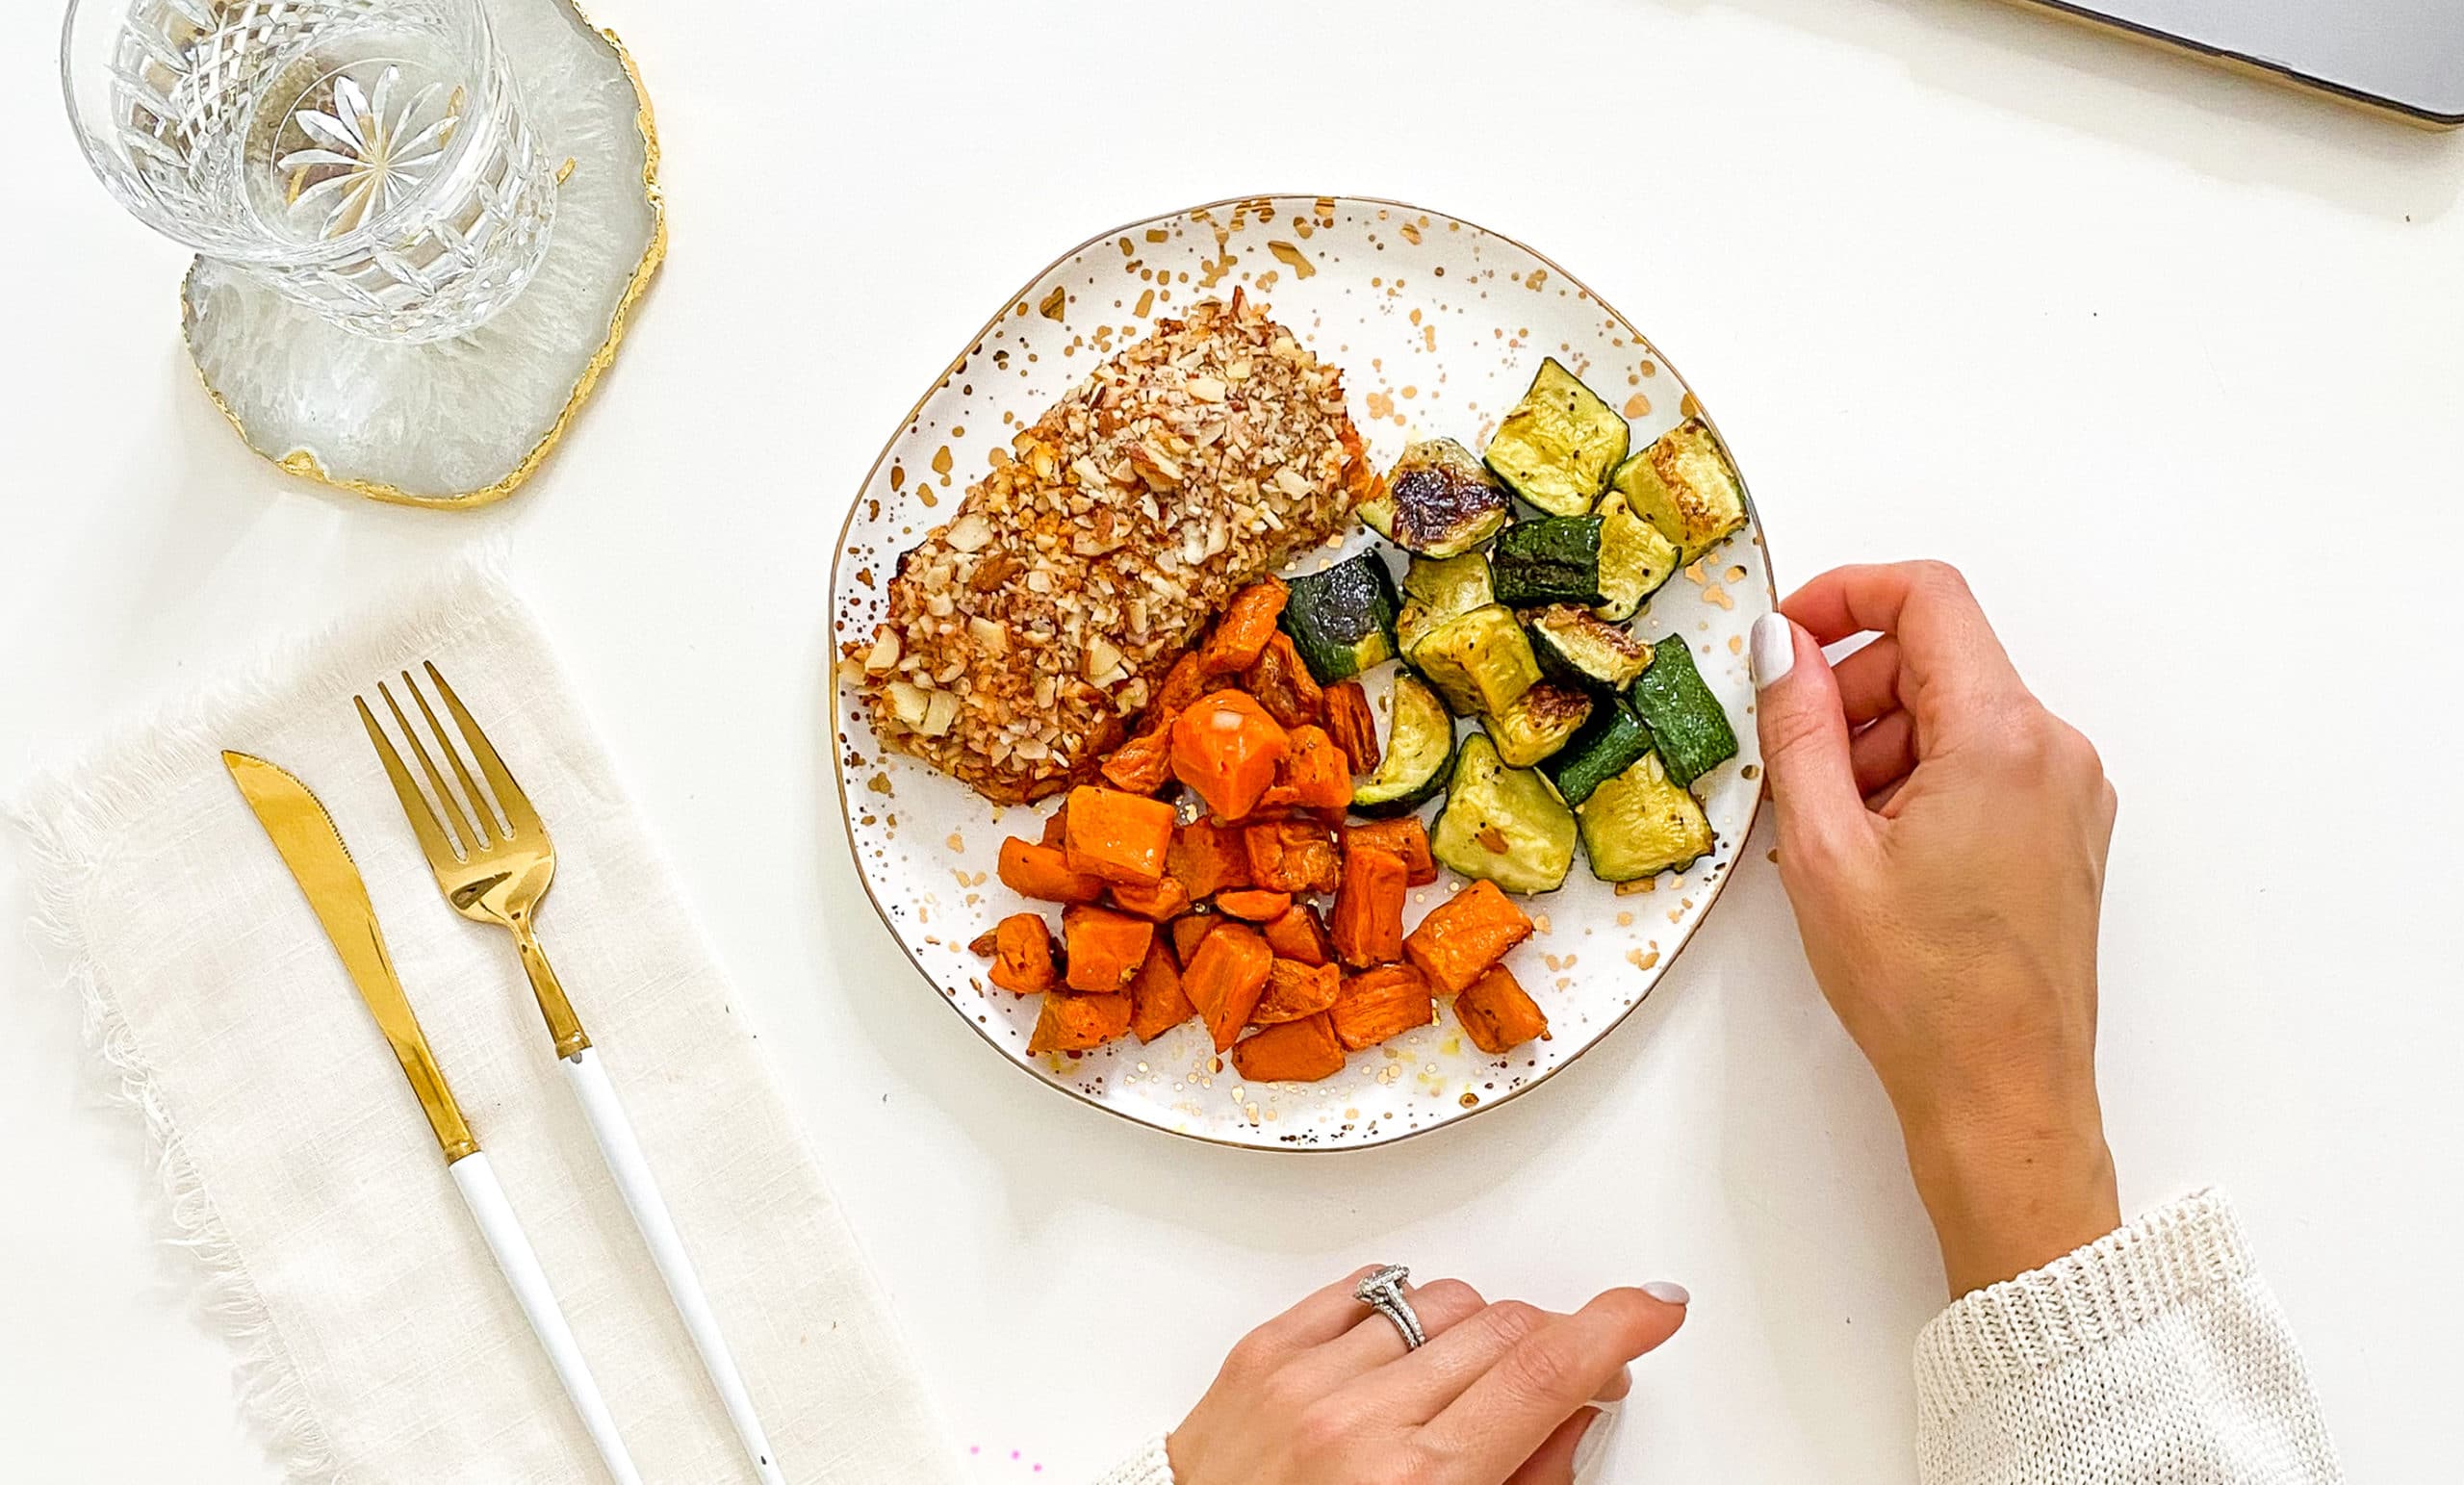 Almond crusted salmon with zucchini and sweet potatoes on a plate with gold accents